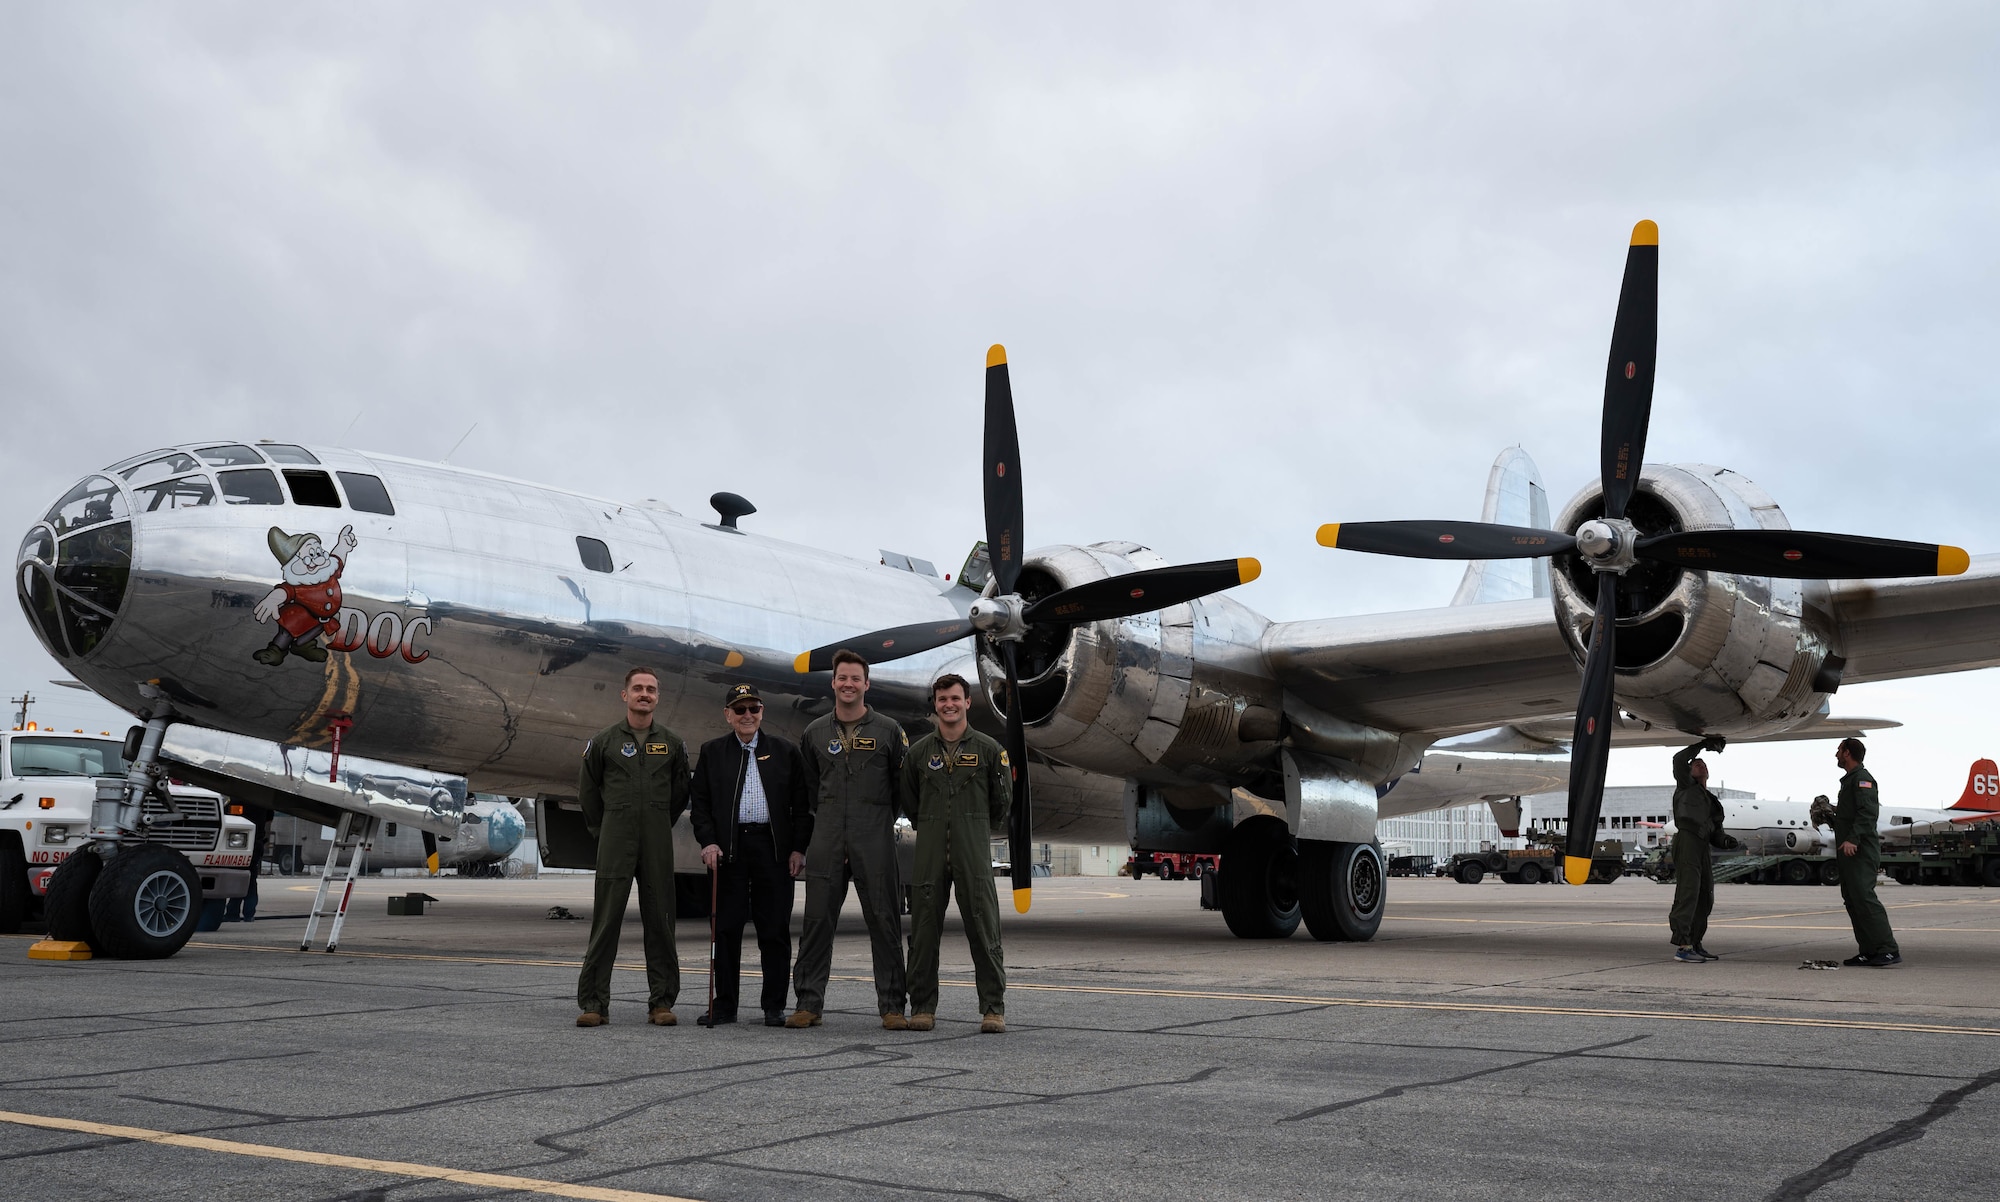 Norris Jernigan, a veteran of the 509th Composite Group, poses with pilots assigned to 393rd Bomb Squadron during a heritage event at historic Wendover Airfield, Utah, May 9, 2022. Jernigan served as an intelligence clerk at Wendover Air Force Base during World War II under the 393rd squadron. The 509th Composite Group, comprising of four subsequent squadrons- including the 393rd squadron, was stood up in 1944, as the weapons delivery section under the Manhattan Project.